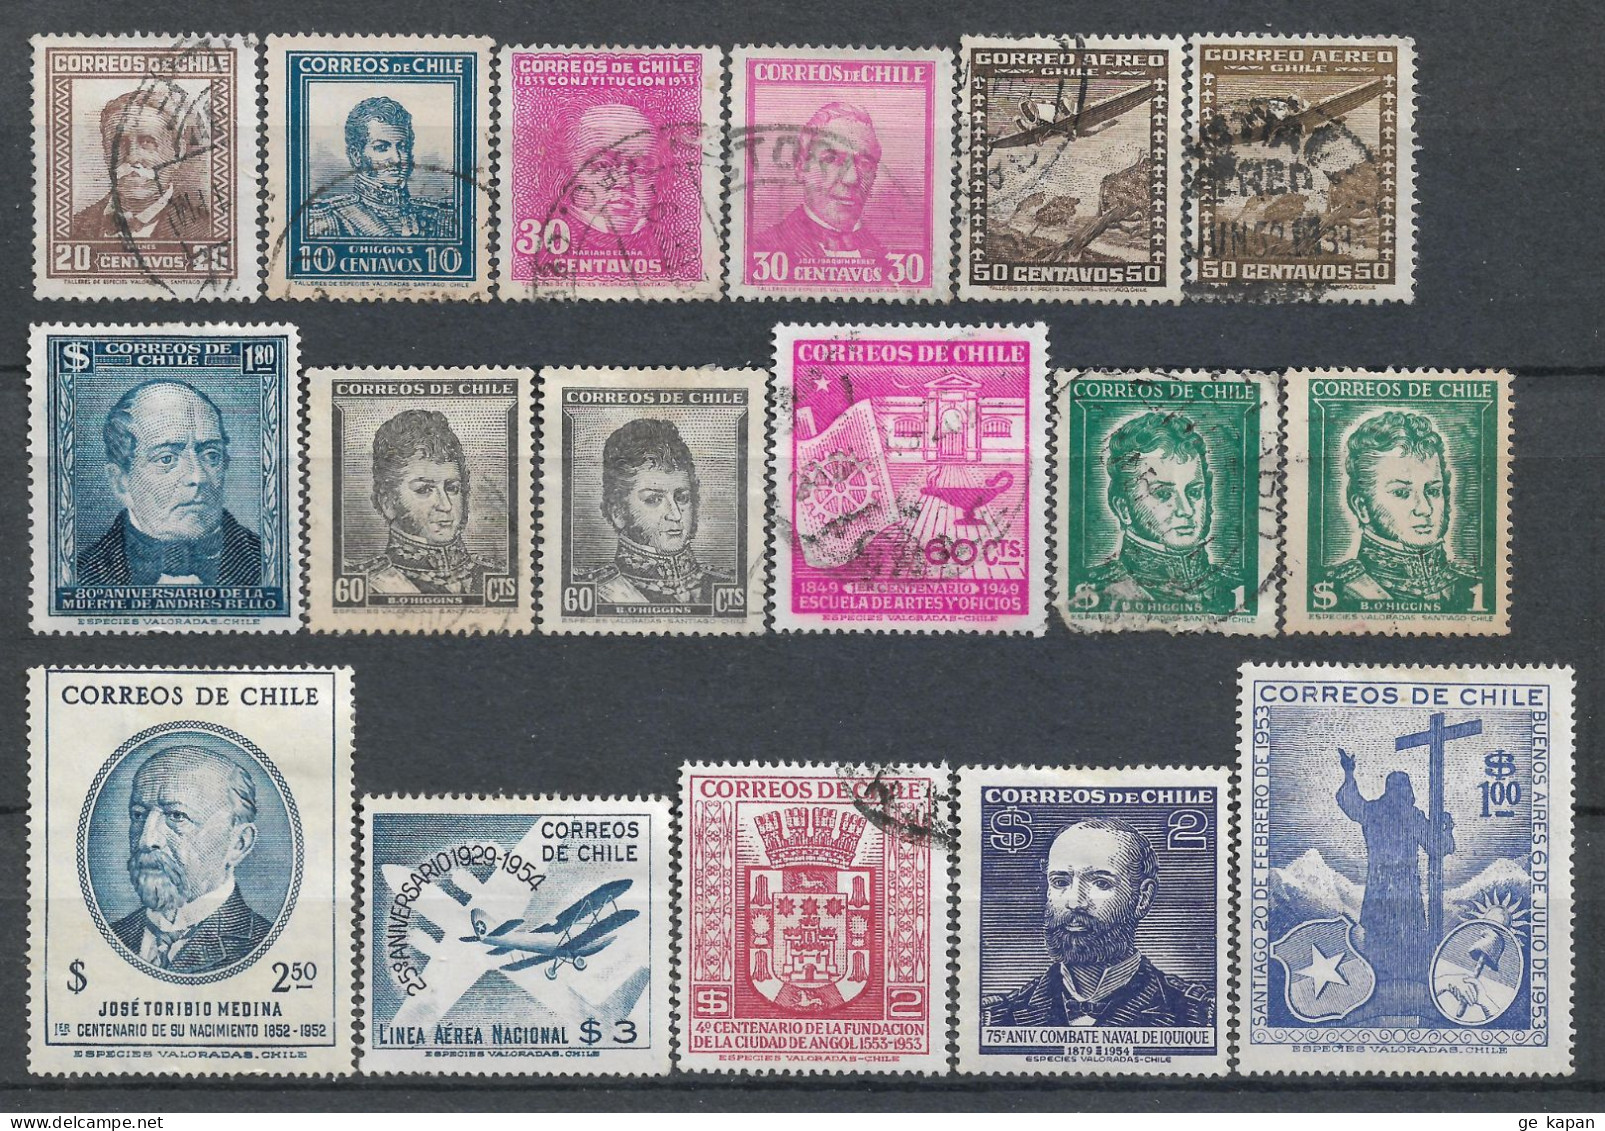 1931-1955 CHILE Set Of 17 Used Stamps (Michel # 186,195,196,198,336,354,360x,440,463x,463y,472,489,490,495,499) CV €4.00 - Chile